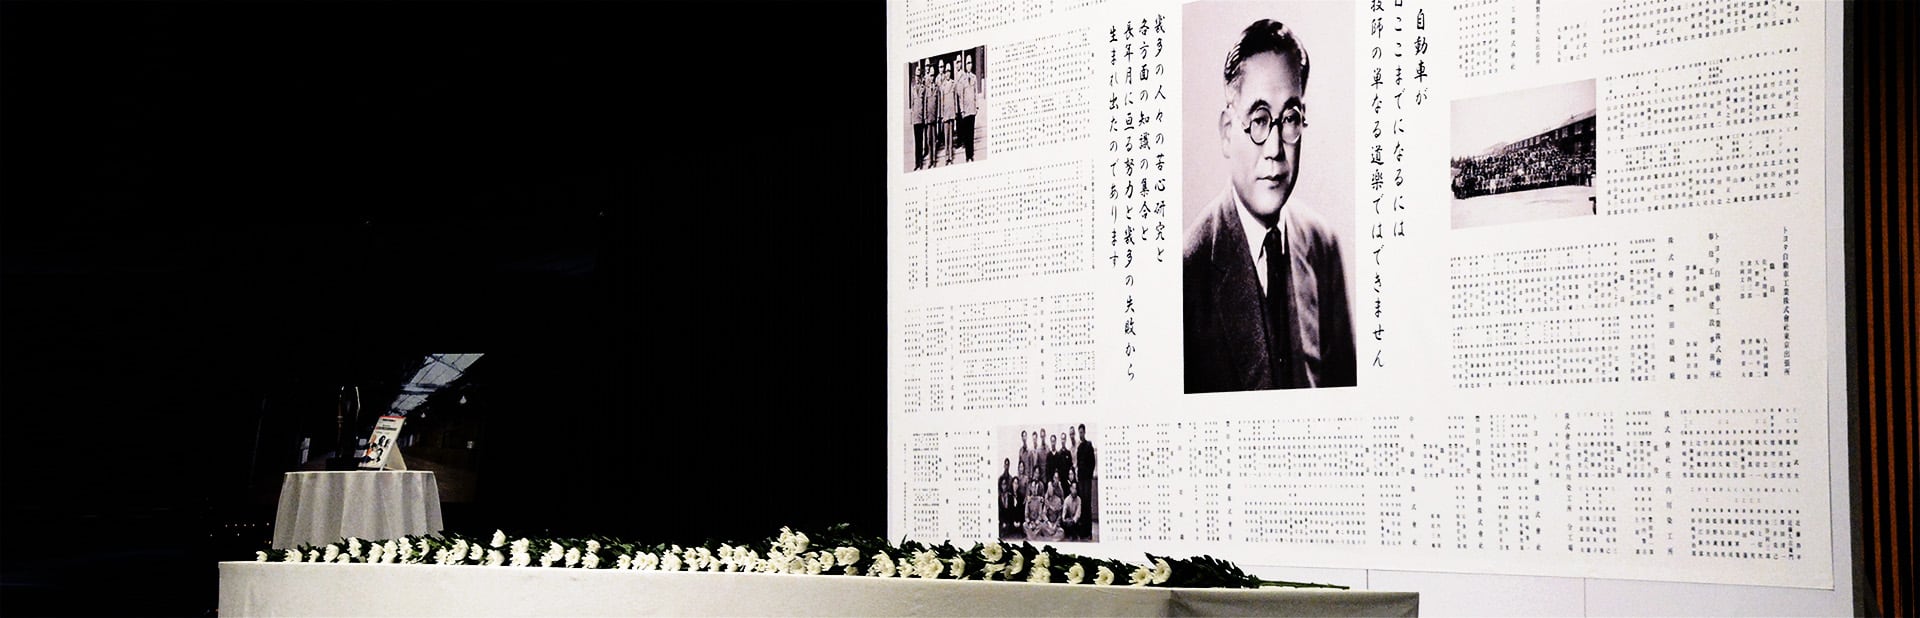 Toyota Commemorates Induction of Kiichiro Toyoda into Automotive Hall of Fame in U.S.